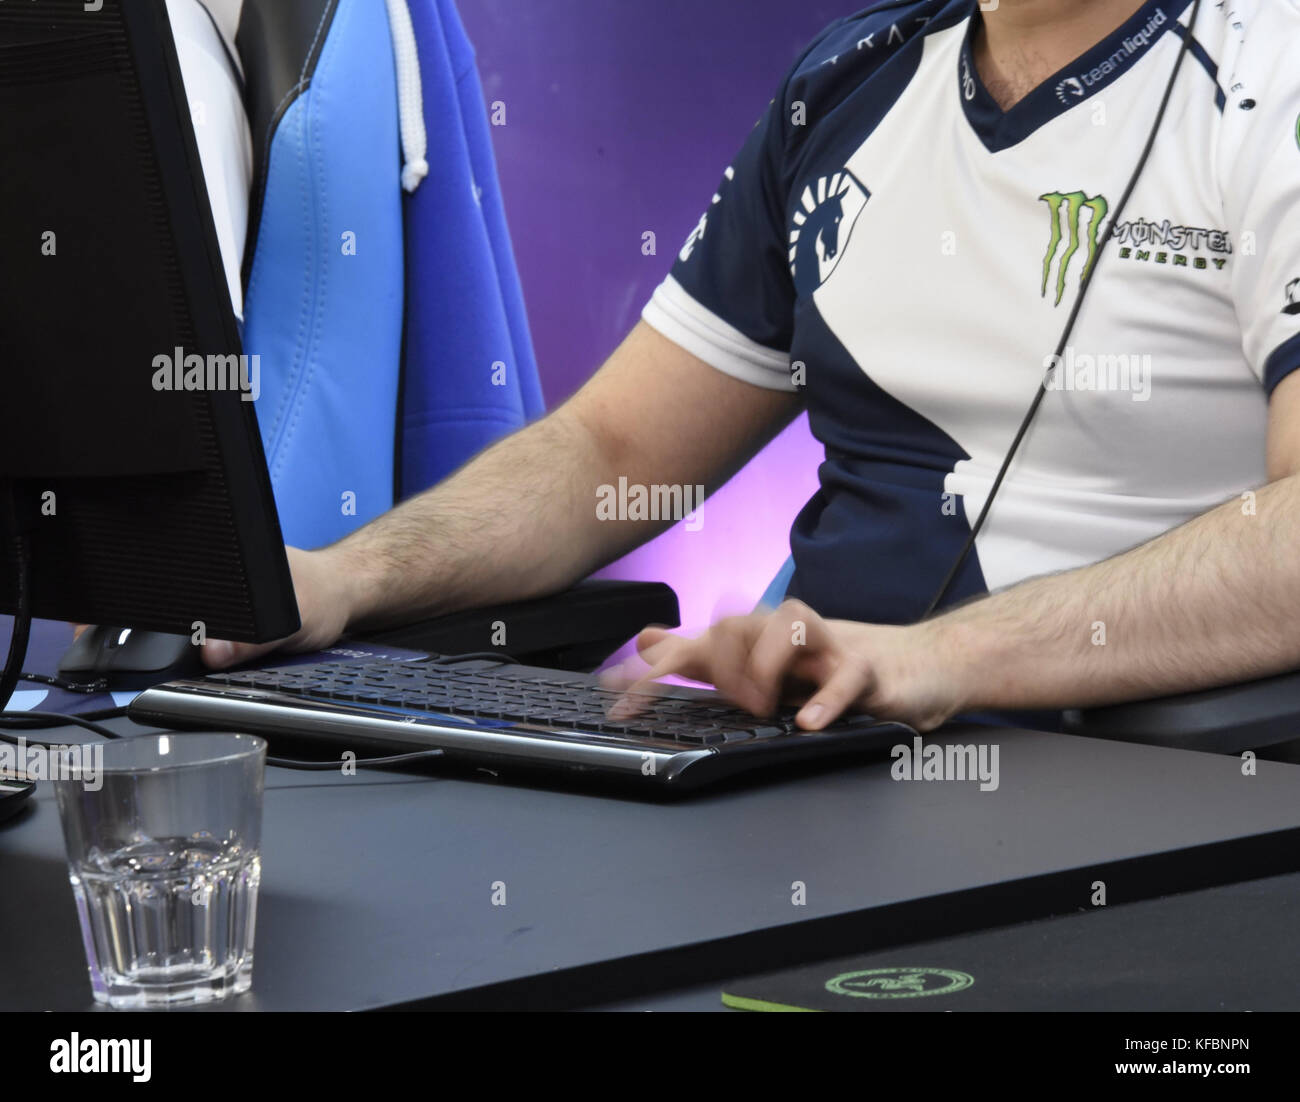 German Dota 2 professional Kuro Salehi Takhasomi (KuroKy) of Team Liquid sits in front of a computer during the preliminary round of the e-sports event ESL One at a hotel in Hamburg, Germany, 26 October 2017. The first matches are carried out at the hotel, before the event continues on 28 October at the Barclaycard Arena with more than 10,000 expected audience members. Prize with a total worth of a Million US-Dollar can be won in the tournament. Photo: Marek Majewsky/dpa Stock Photo